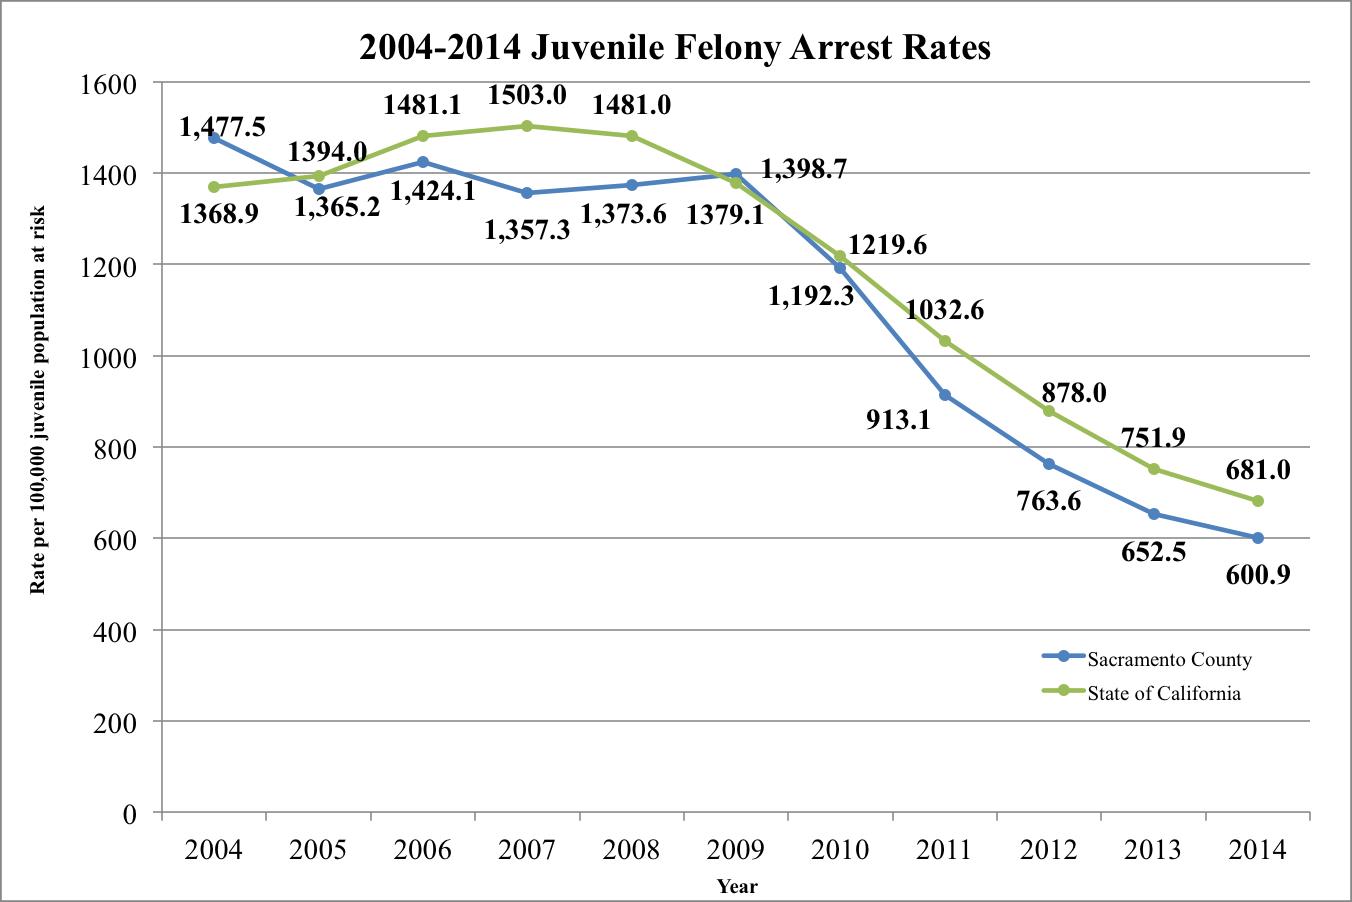 Graph showing 2004-2014 decline in Juvenile Felony Arrest Rates for State of California and Sacramento County.